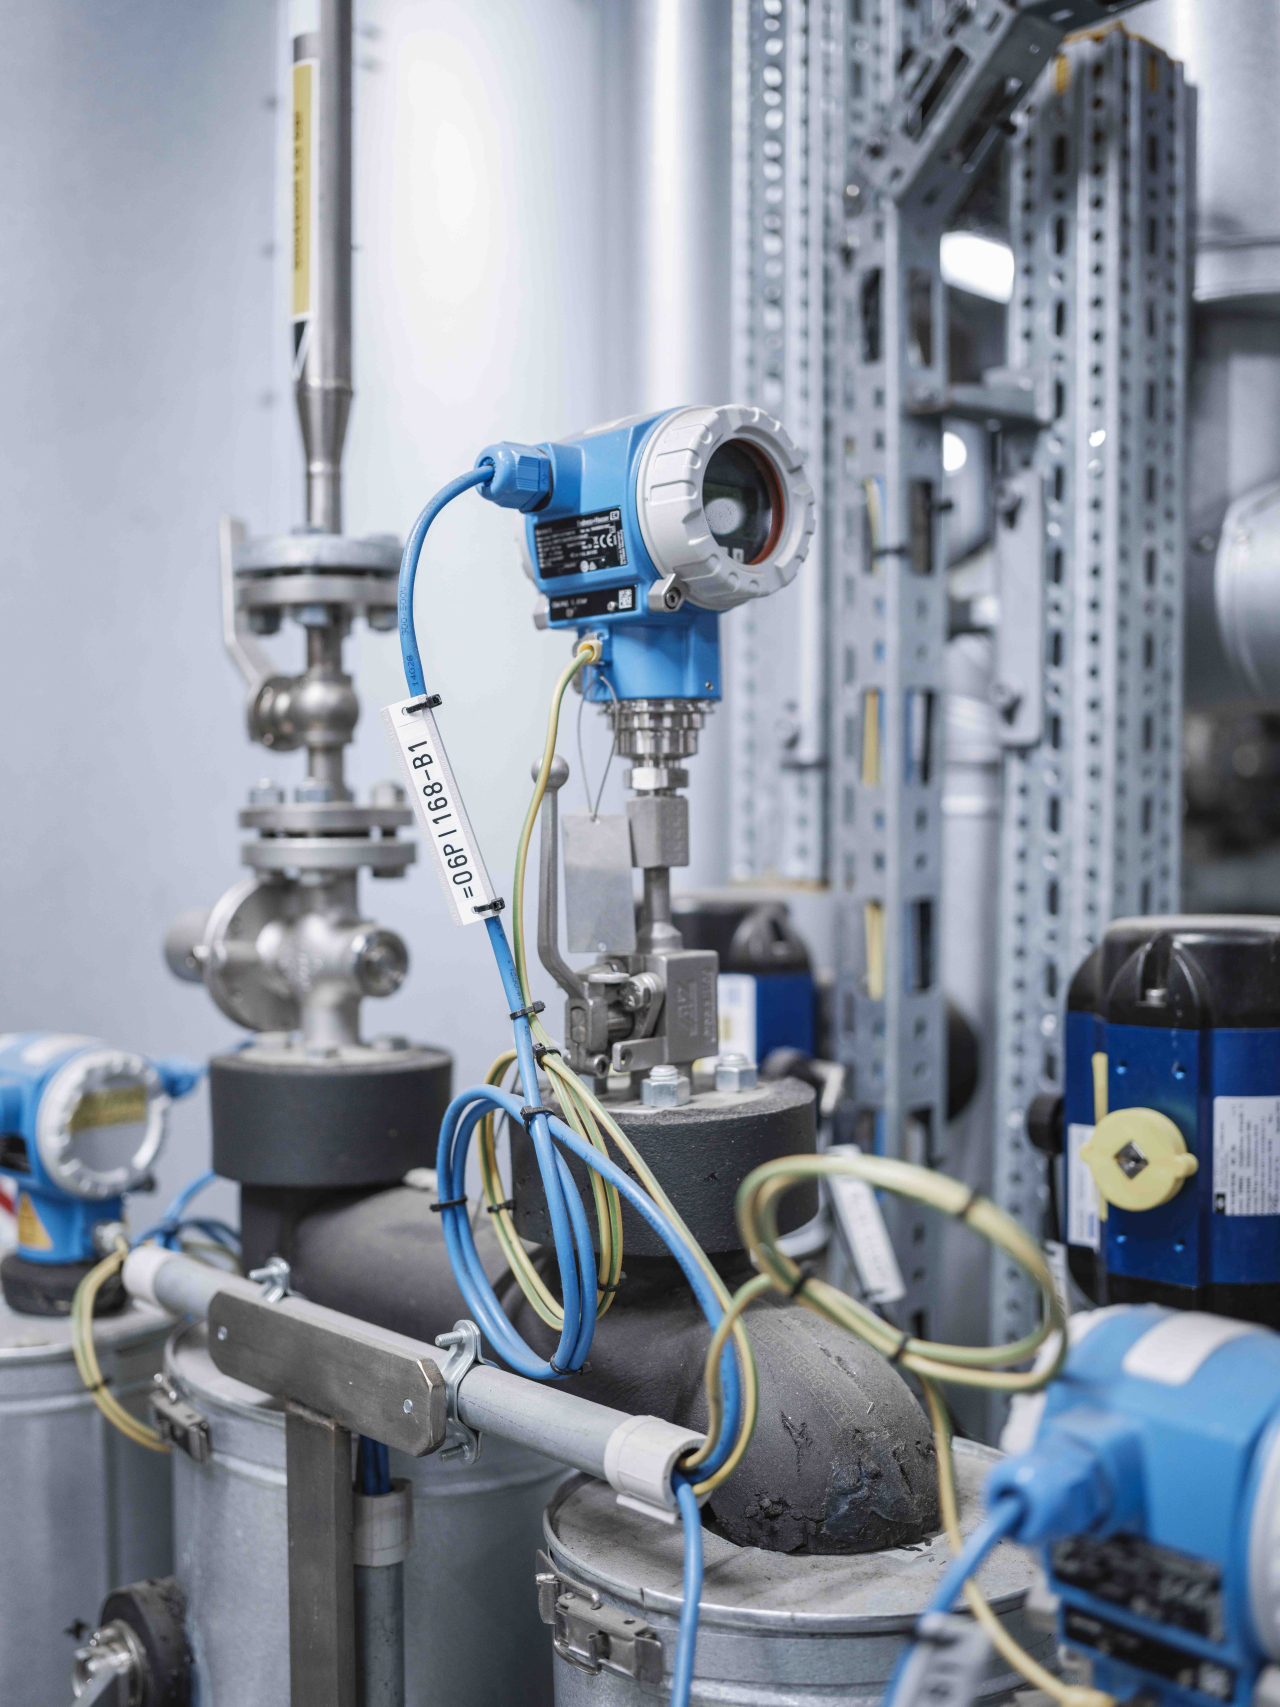 DSM uses a wide range of measurement technologies from Endress+Hauser, including pressure instruments.